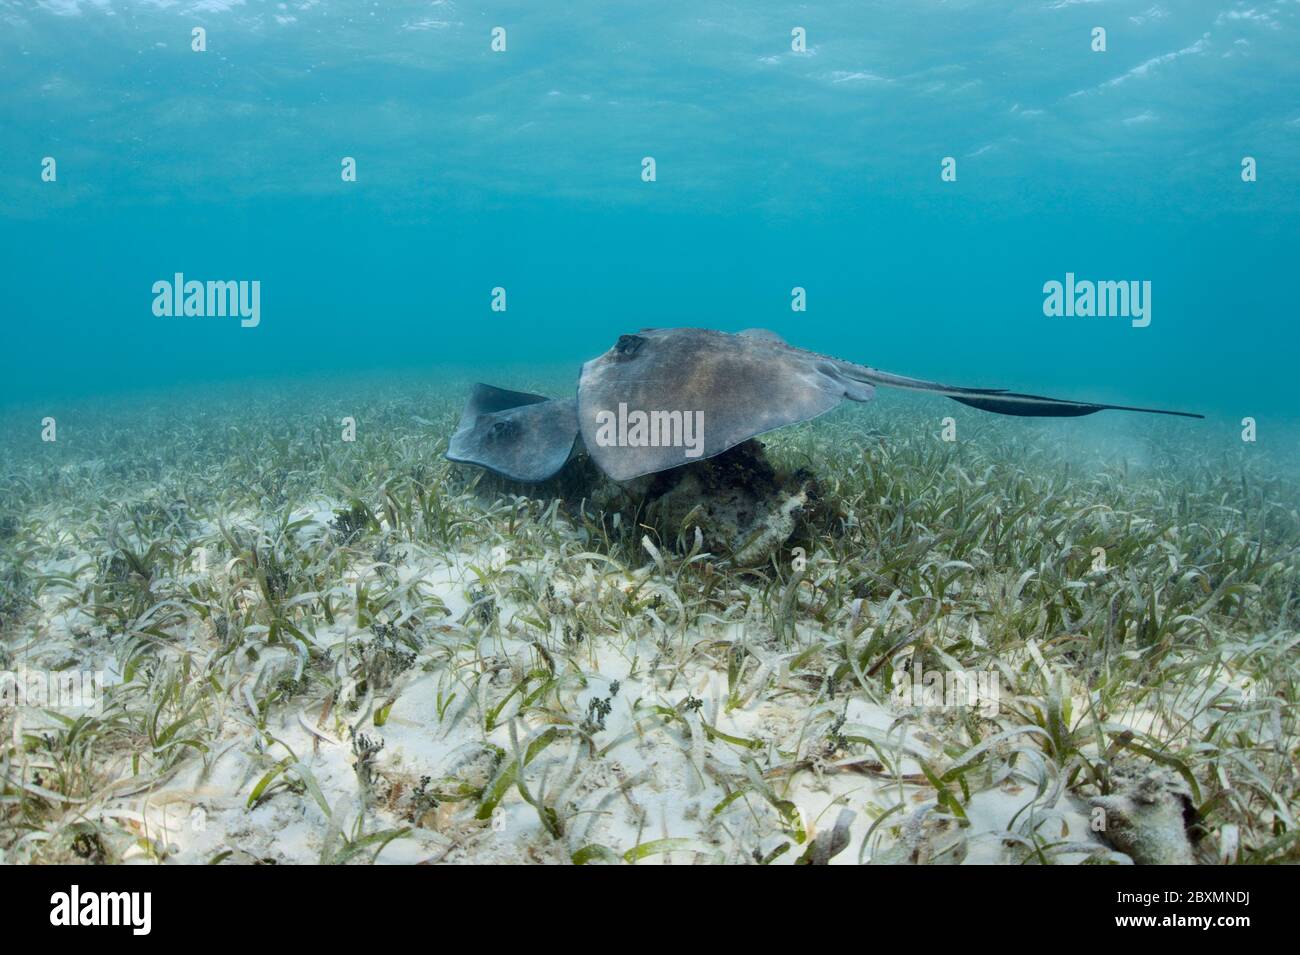 Two Southern stingrays swimming over a Seagrass meadow at Silky Caye in Belize. Stock Photo